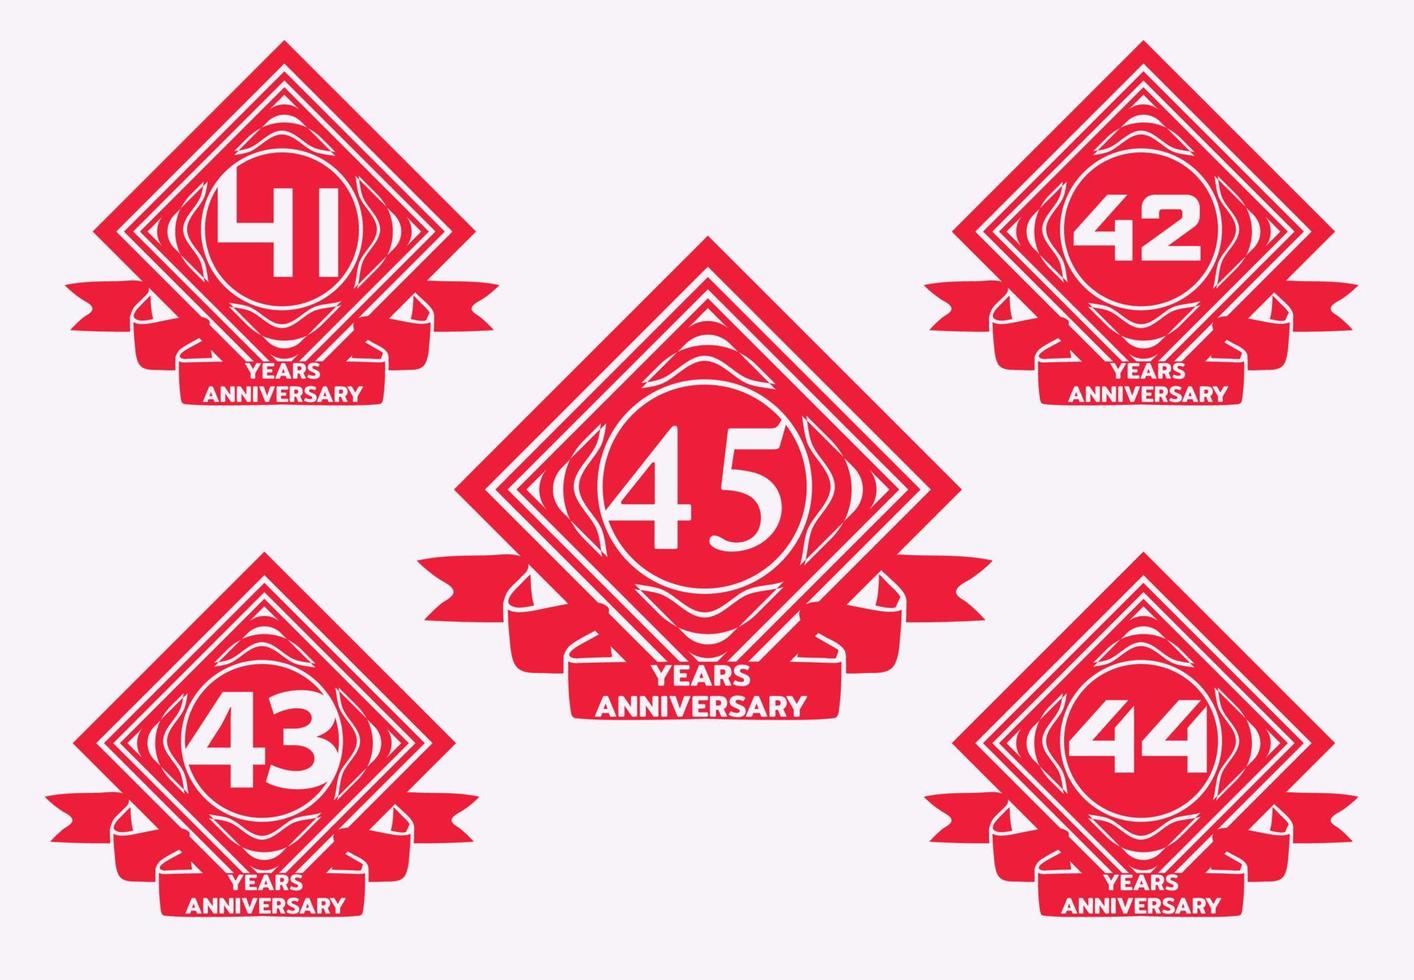 41 to 45 years anniversary logo and sticker design template vector